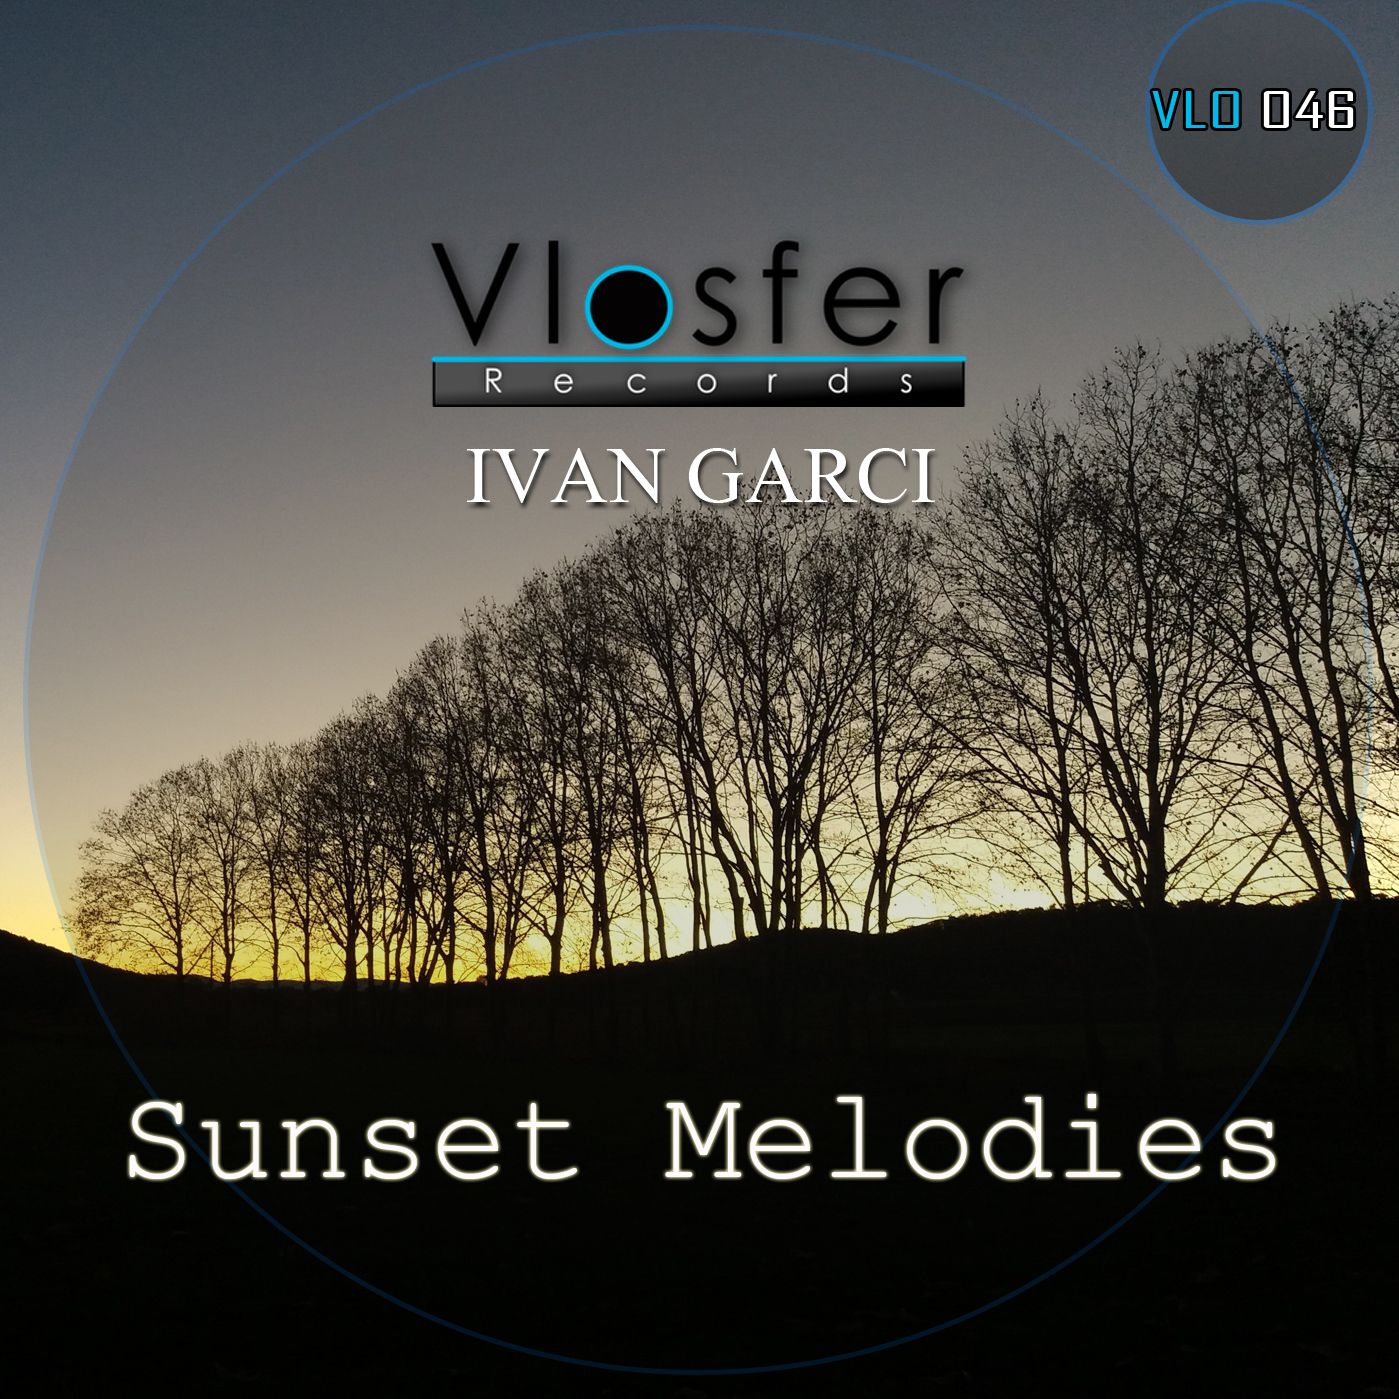 Download Clear - Ivan Garci (low quality sound) Vlosfer records.